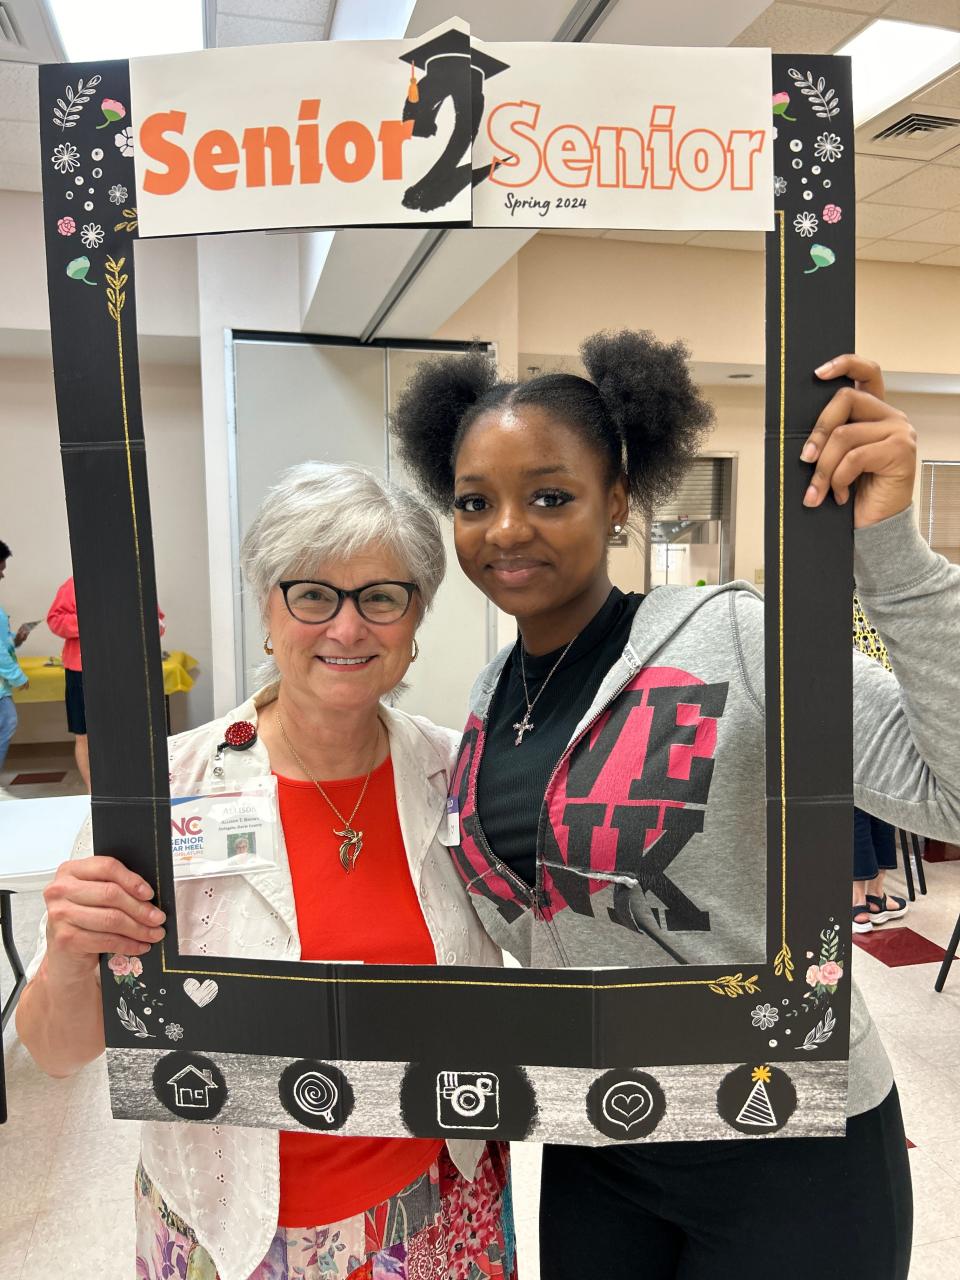 Allison Brown (left) and Brianna Covington (right), a senior at Davie County High School. The pair met as part of a pen pal program created by Covington's English teacher, Ashley Snider.